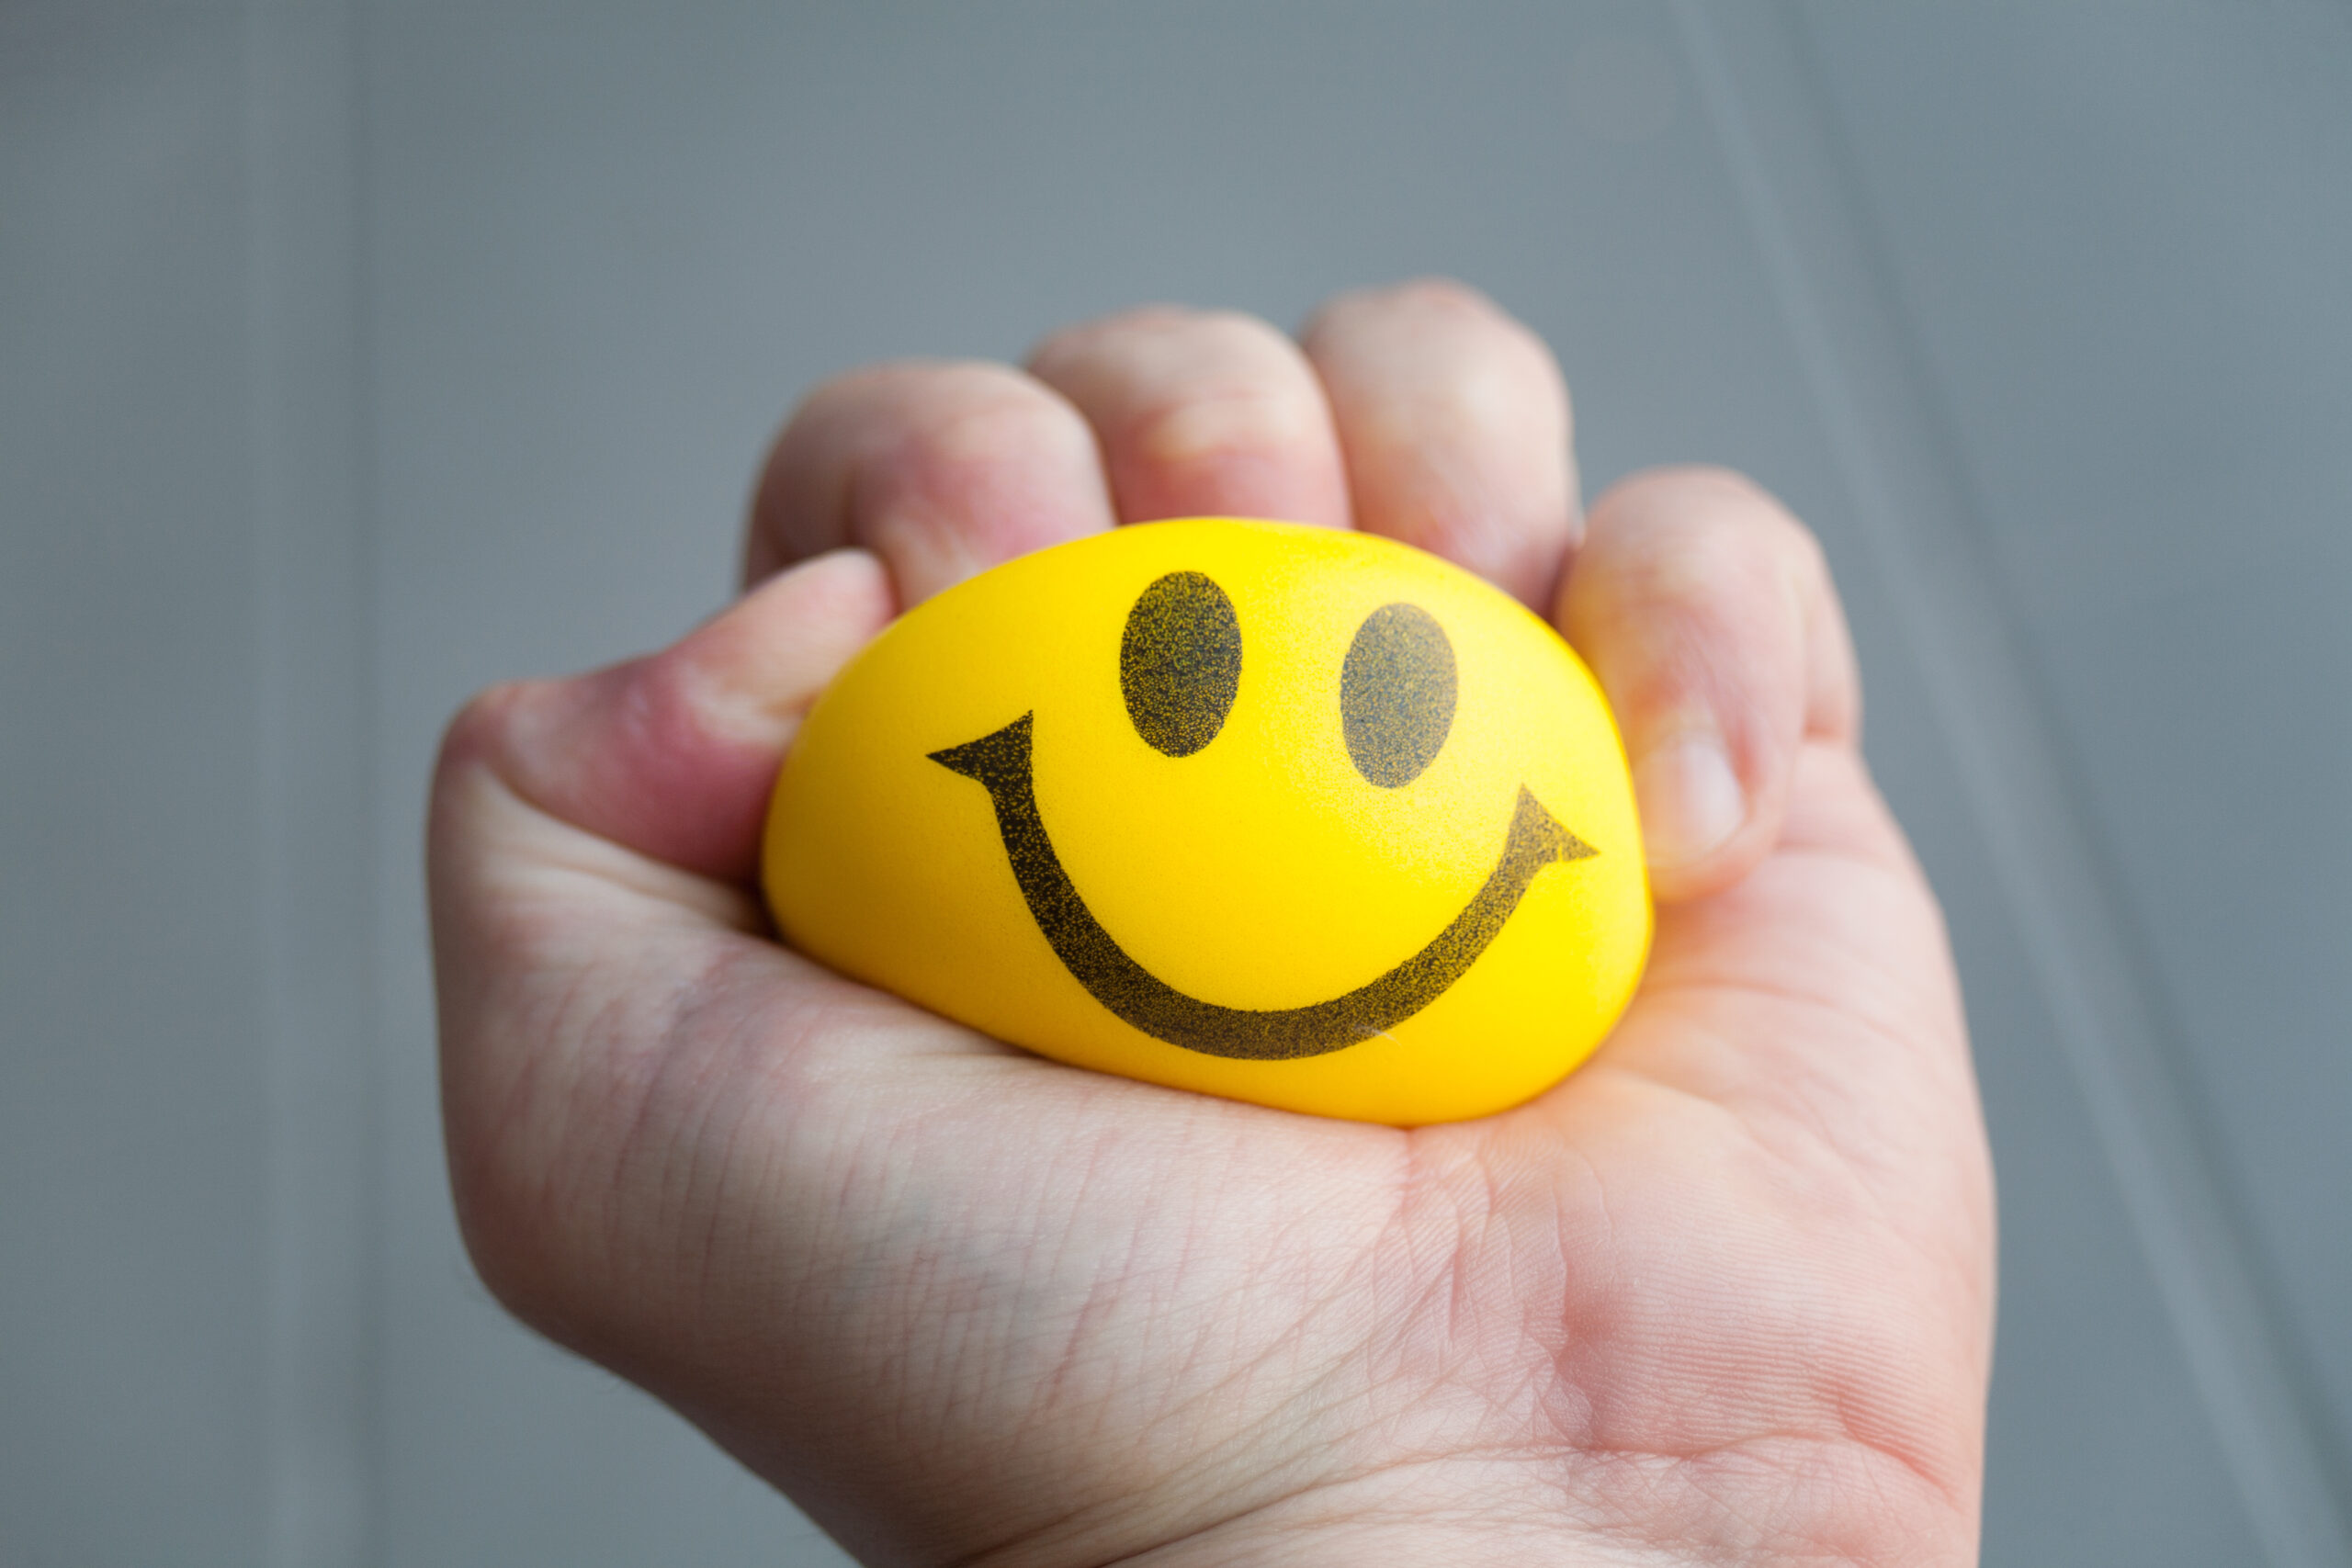 Hand squeezing yellow stress ball with smiley face